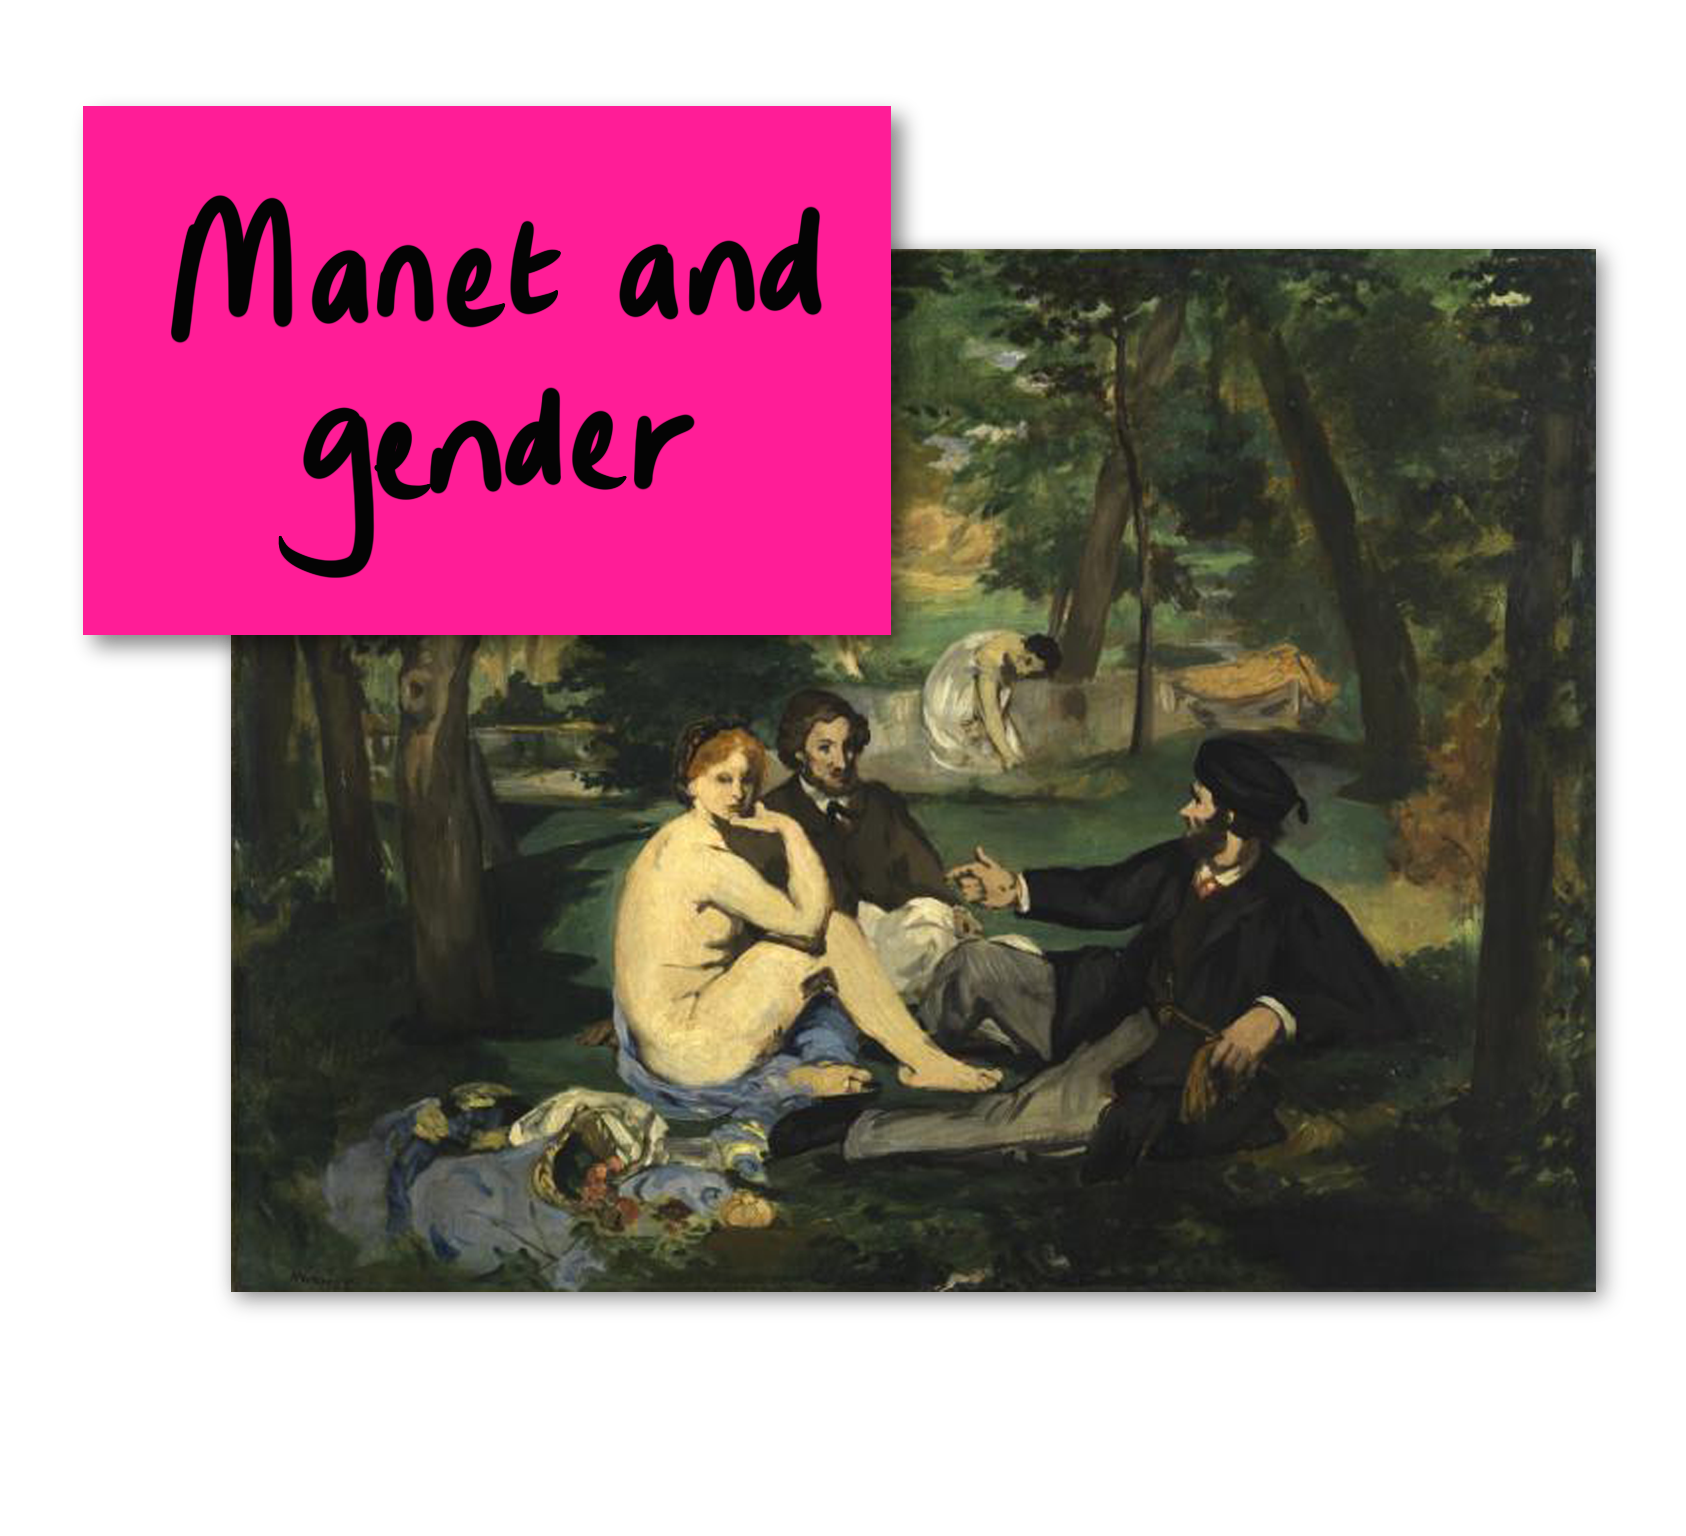 Manet and gender with image of Le Déjeuner sur l'herbe painting